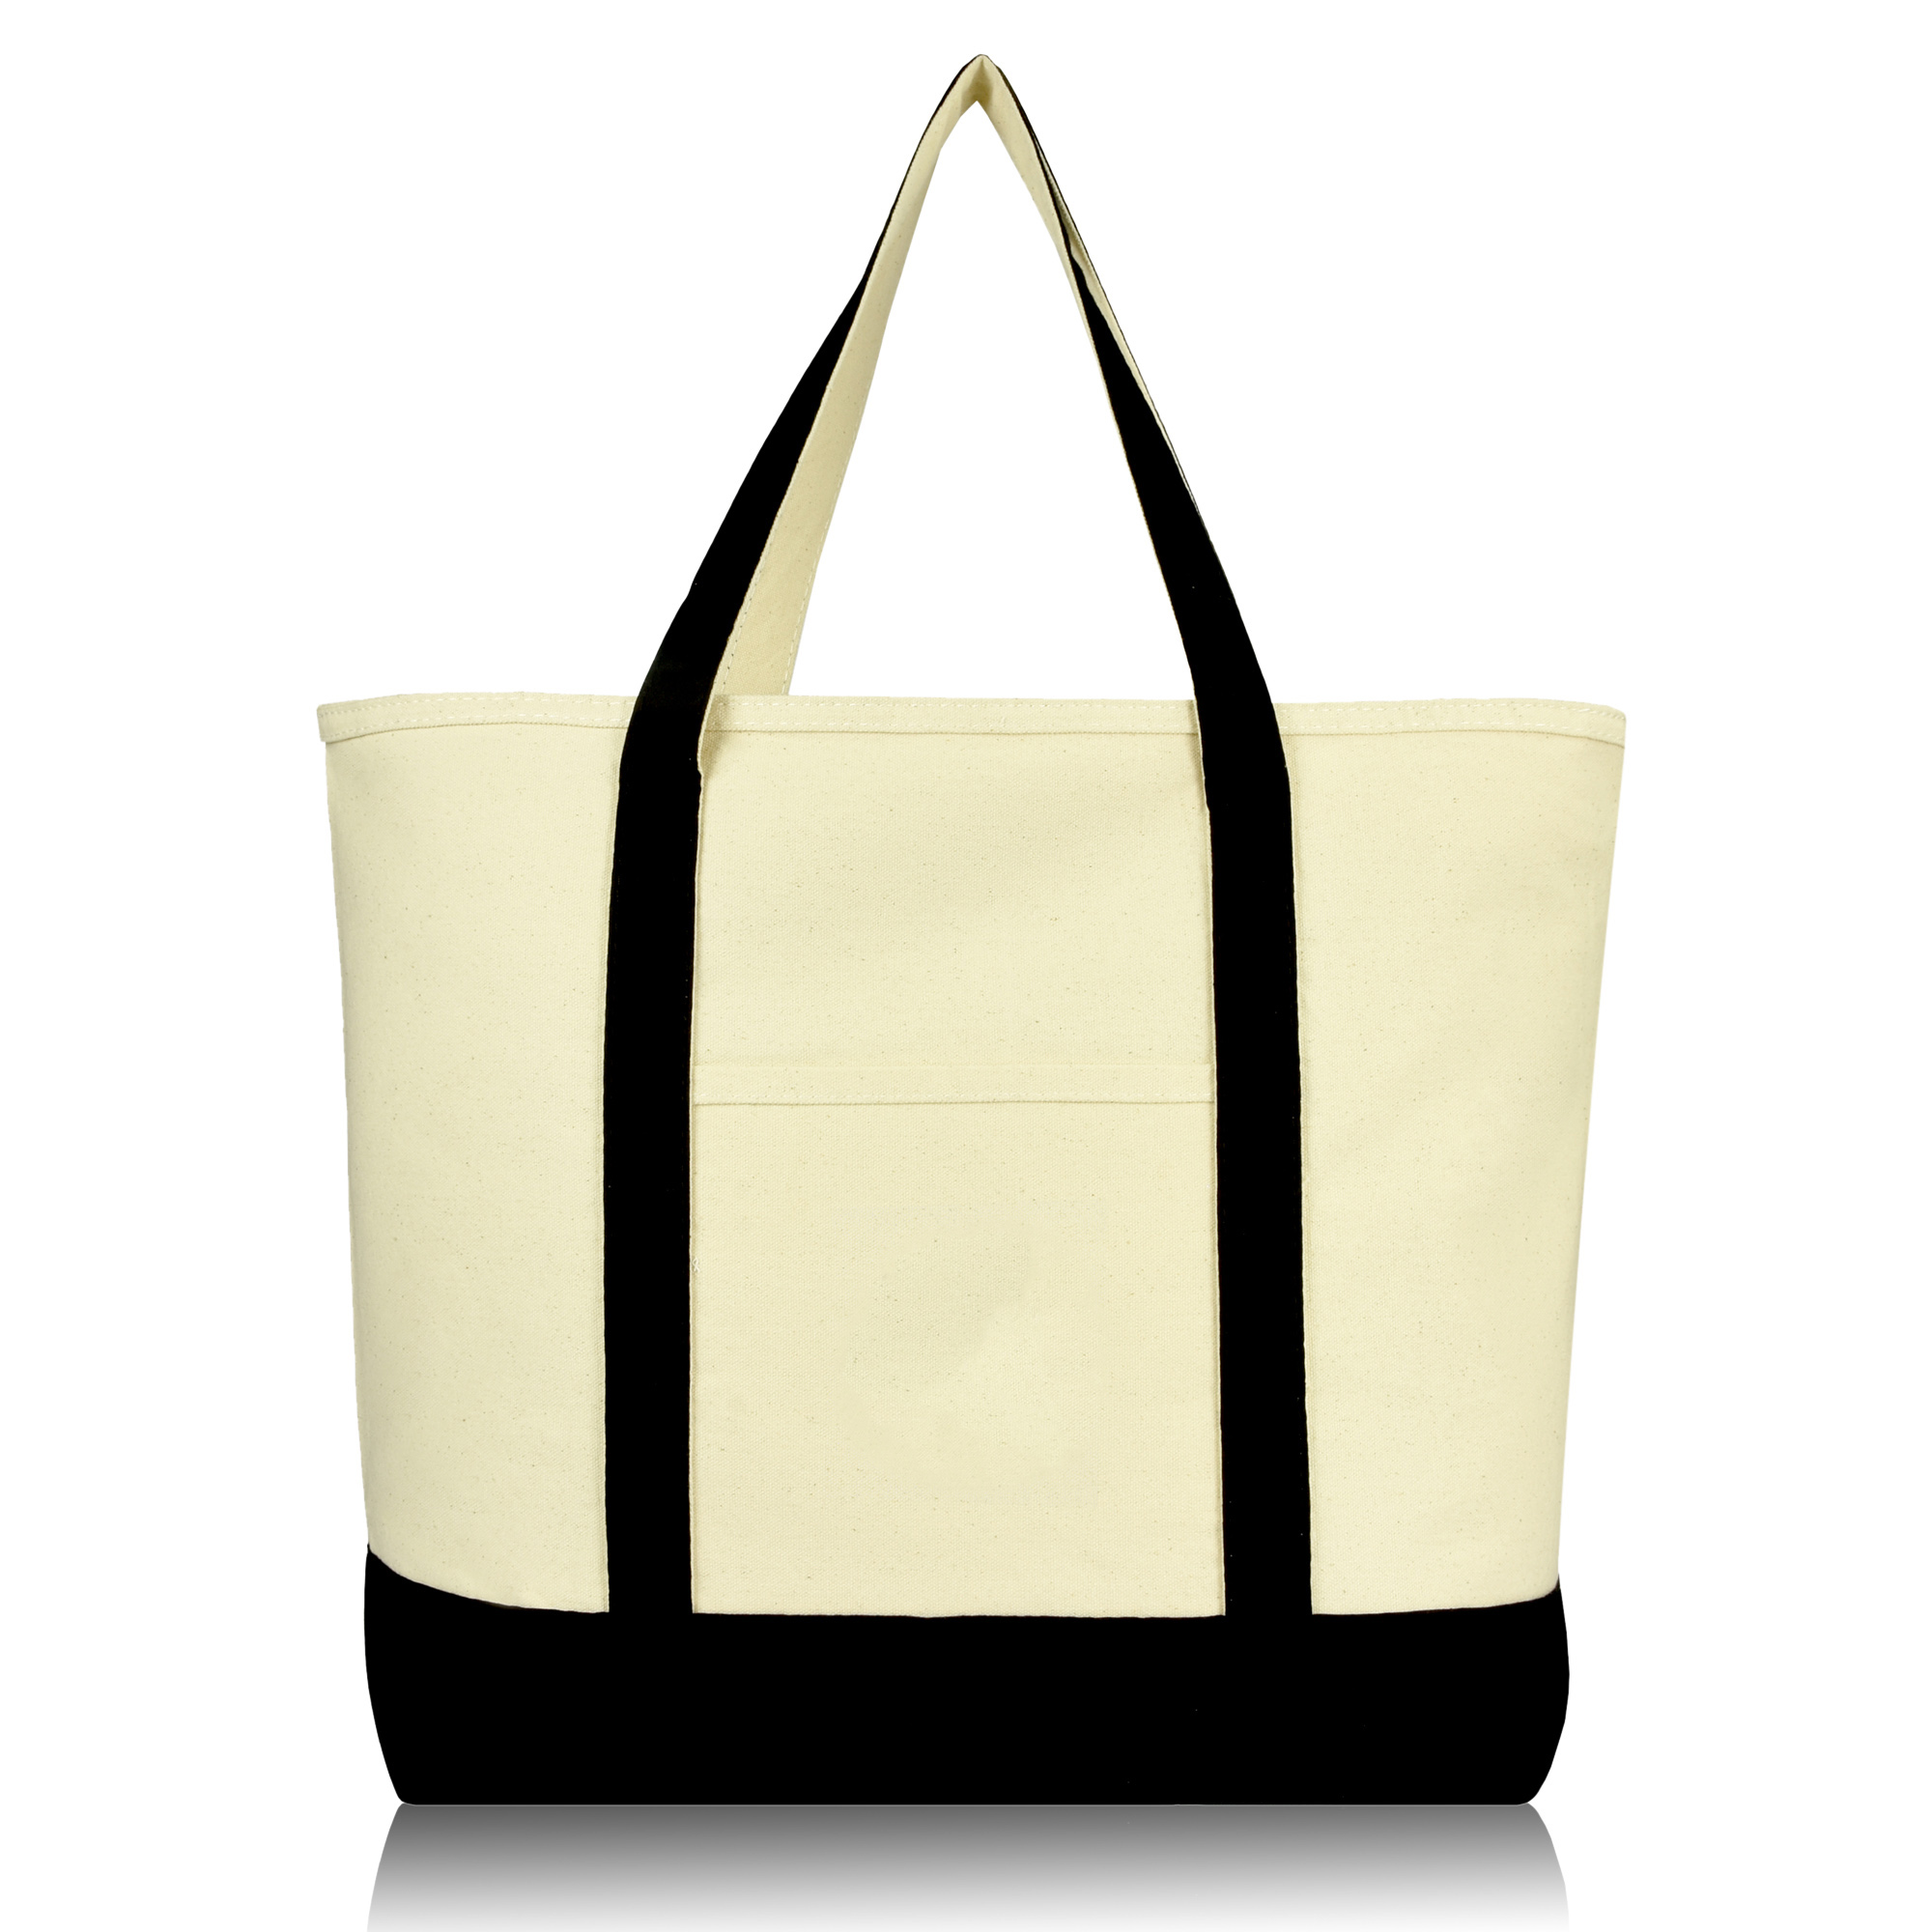 DALIX 22" Extra Large Cotton Canvas Zippered Shopping Tote Grocery Bag in Black Female - image 1 of 6